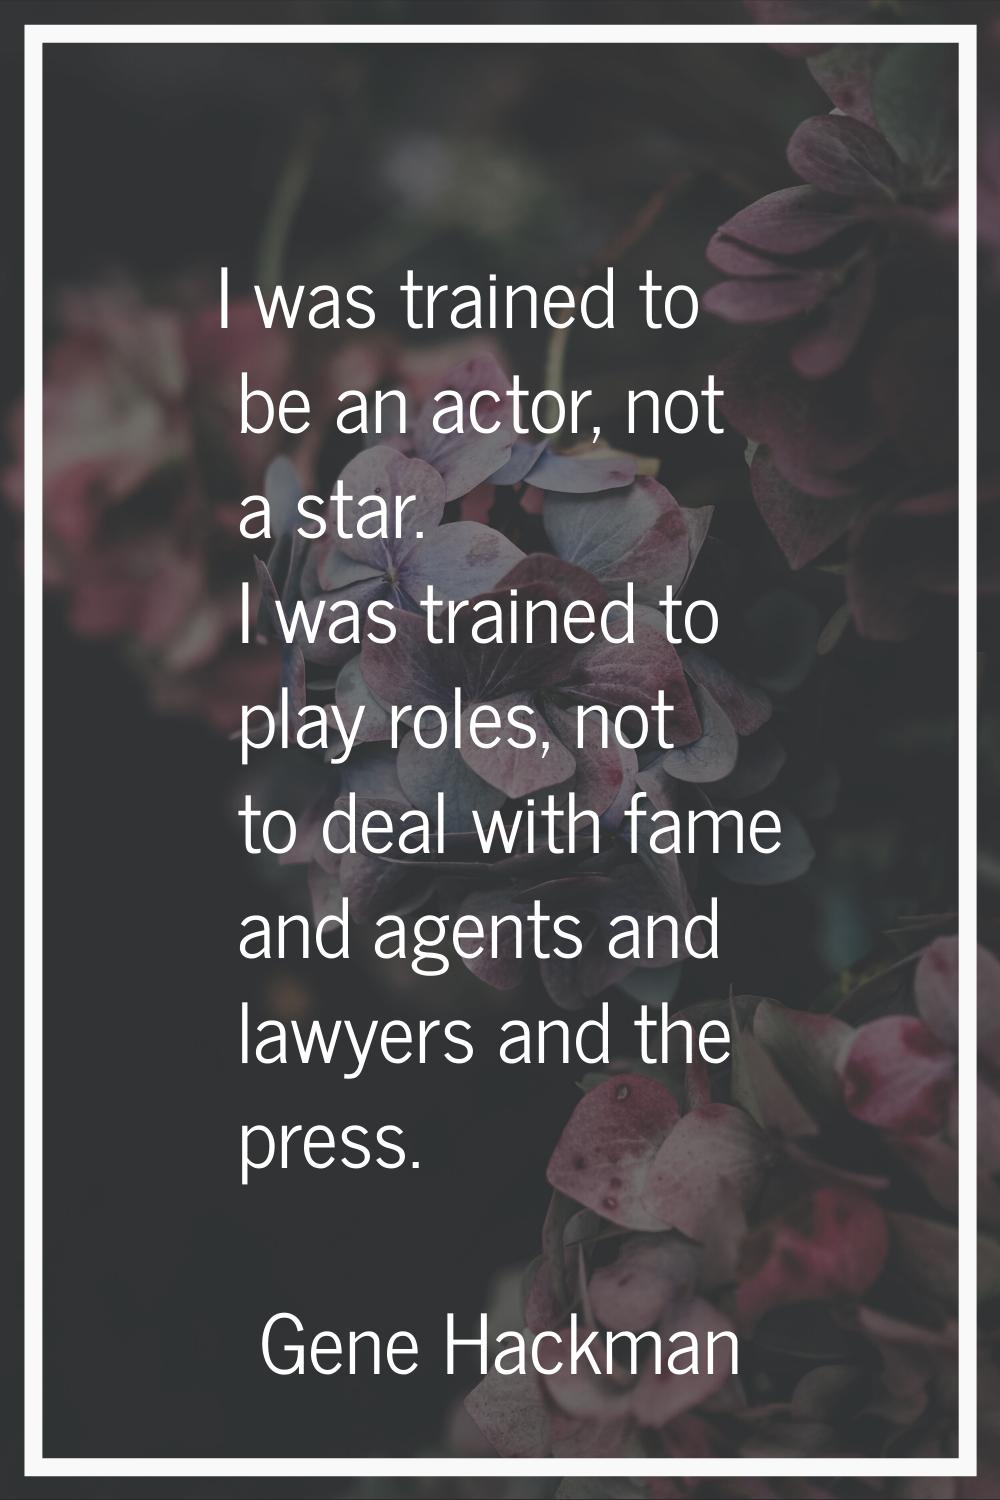 I was trained to be an actor, not a star. I was trained to play roles, not to deal with fame and ag